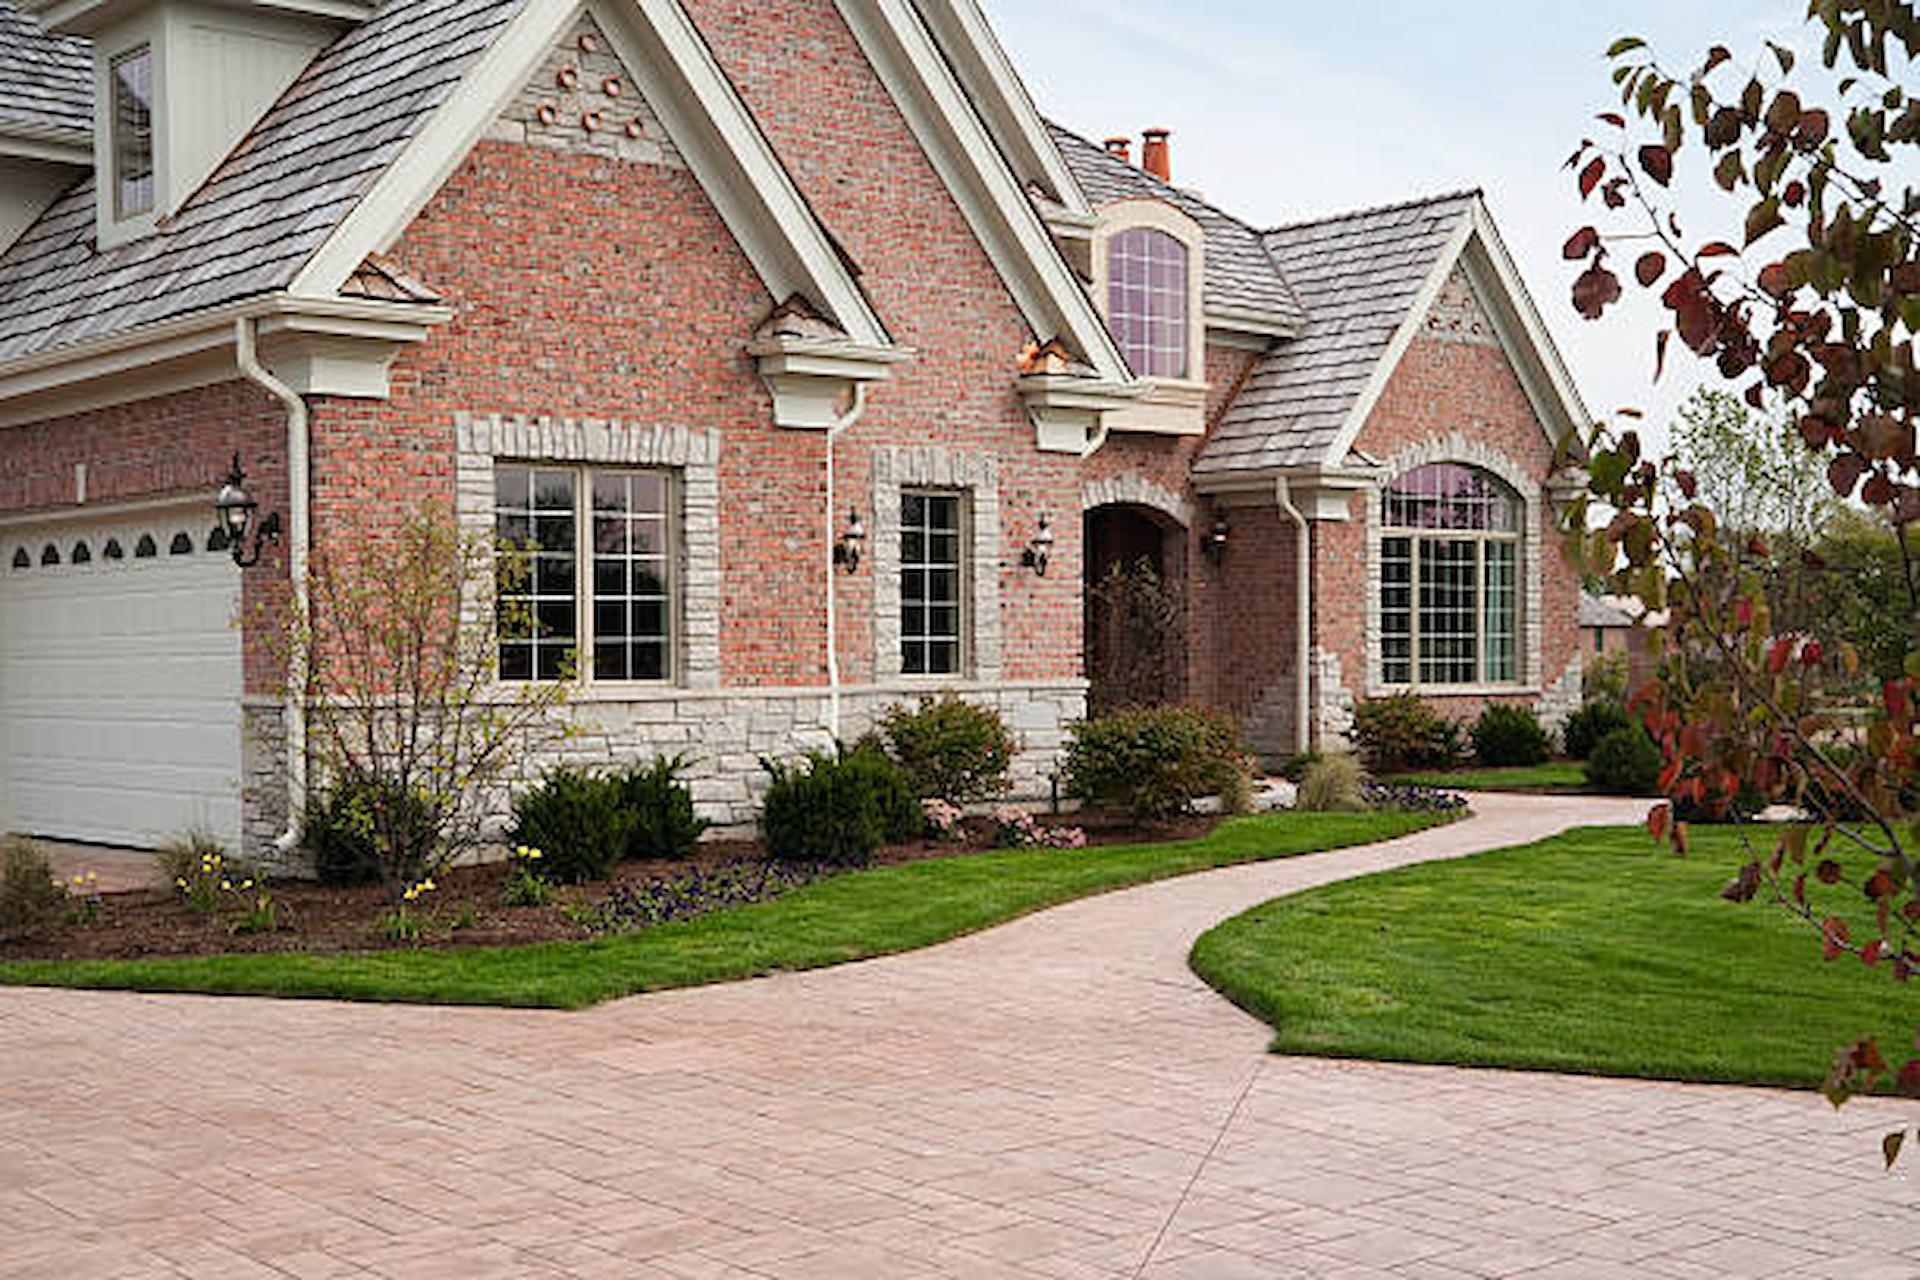 Driveway Sealant Uses And Benefits You May Need To Know